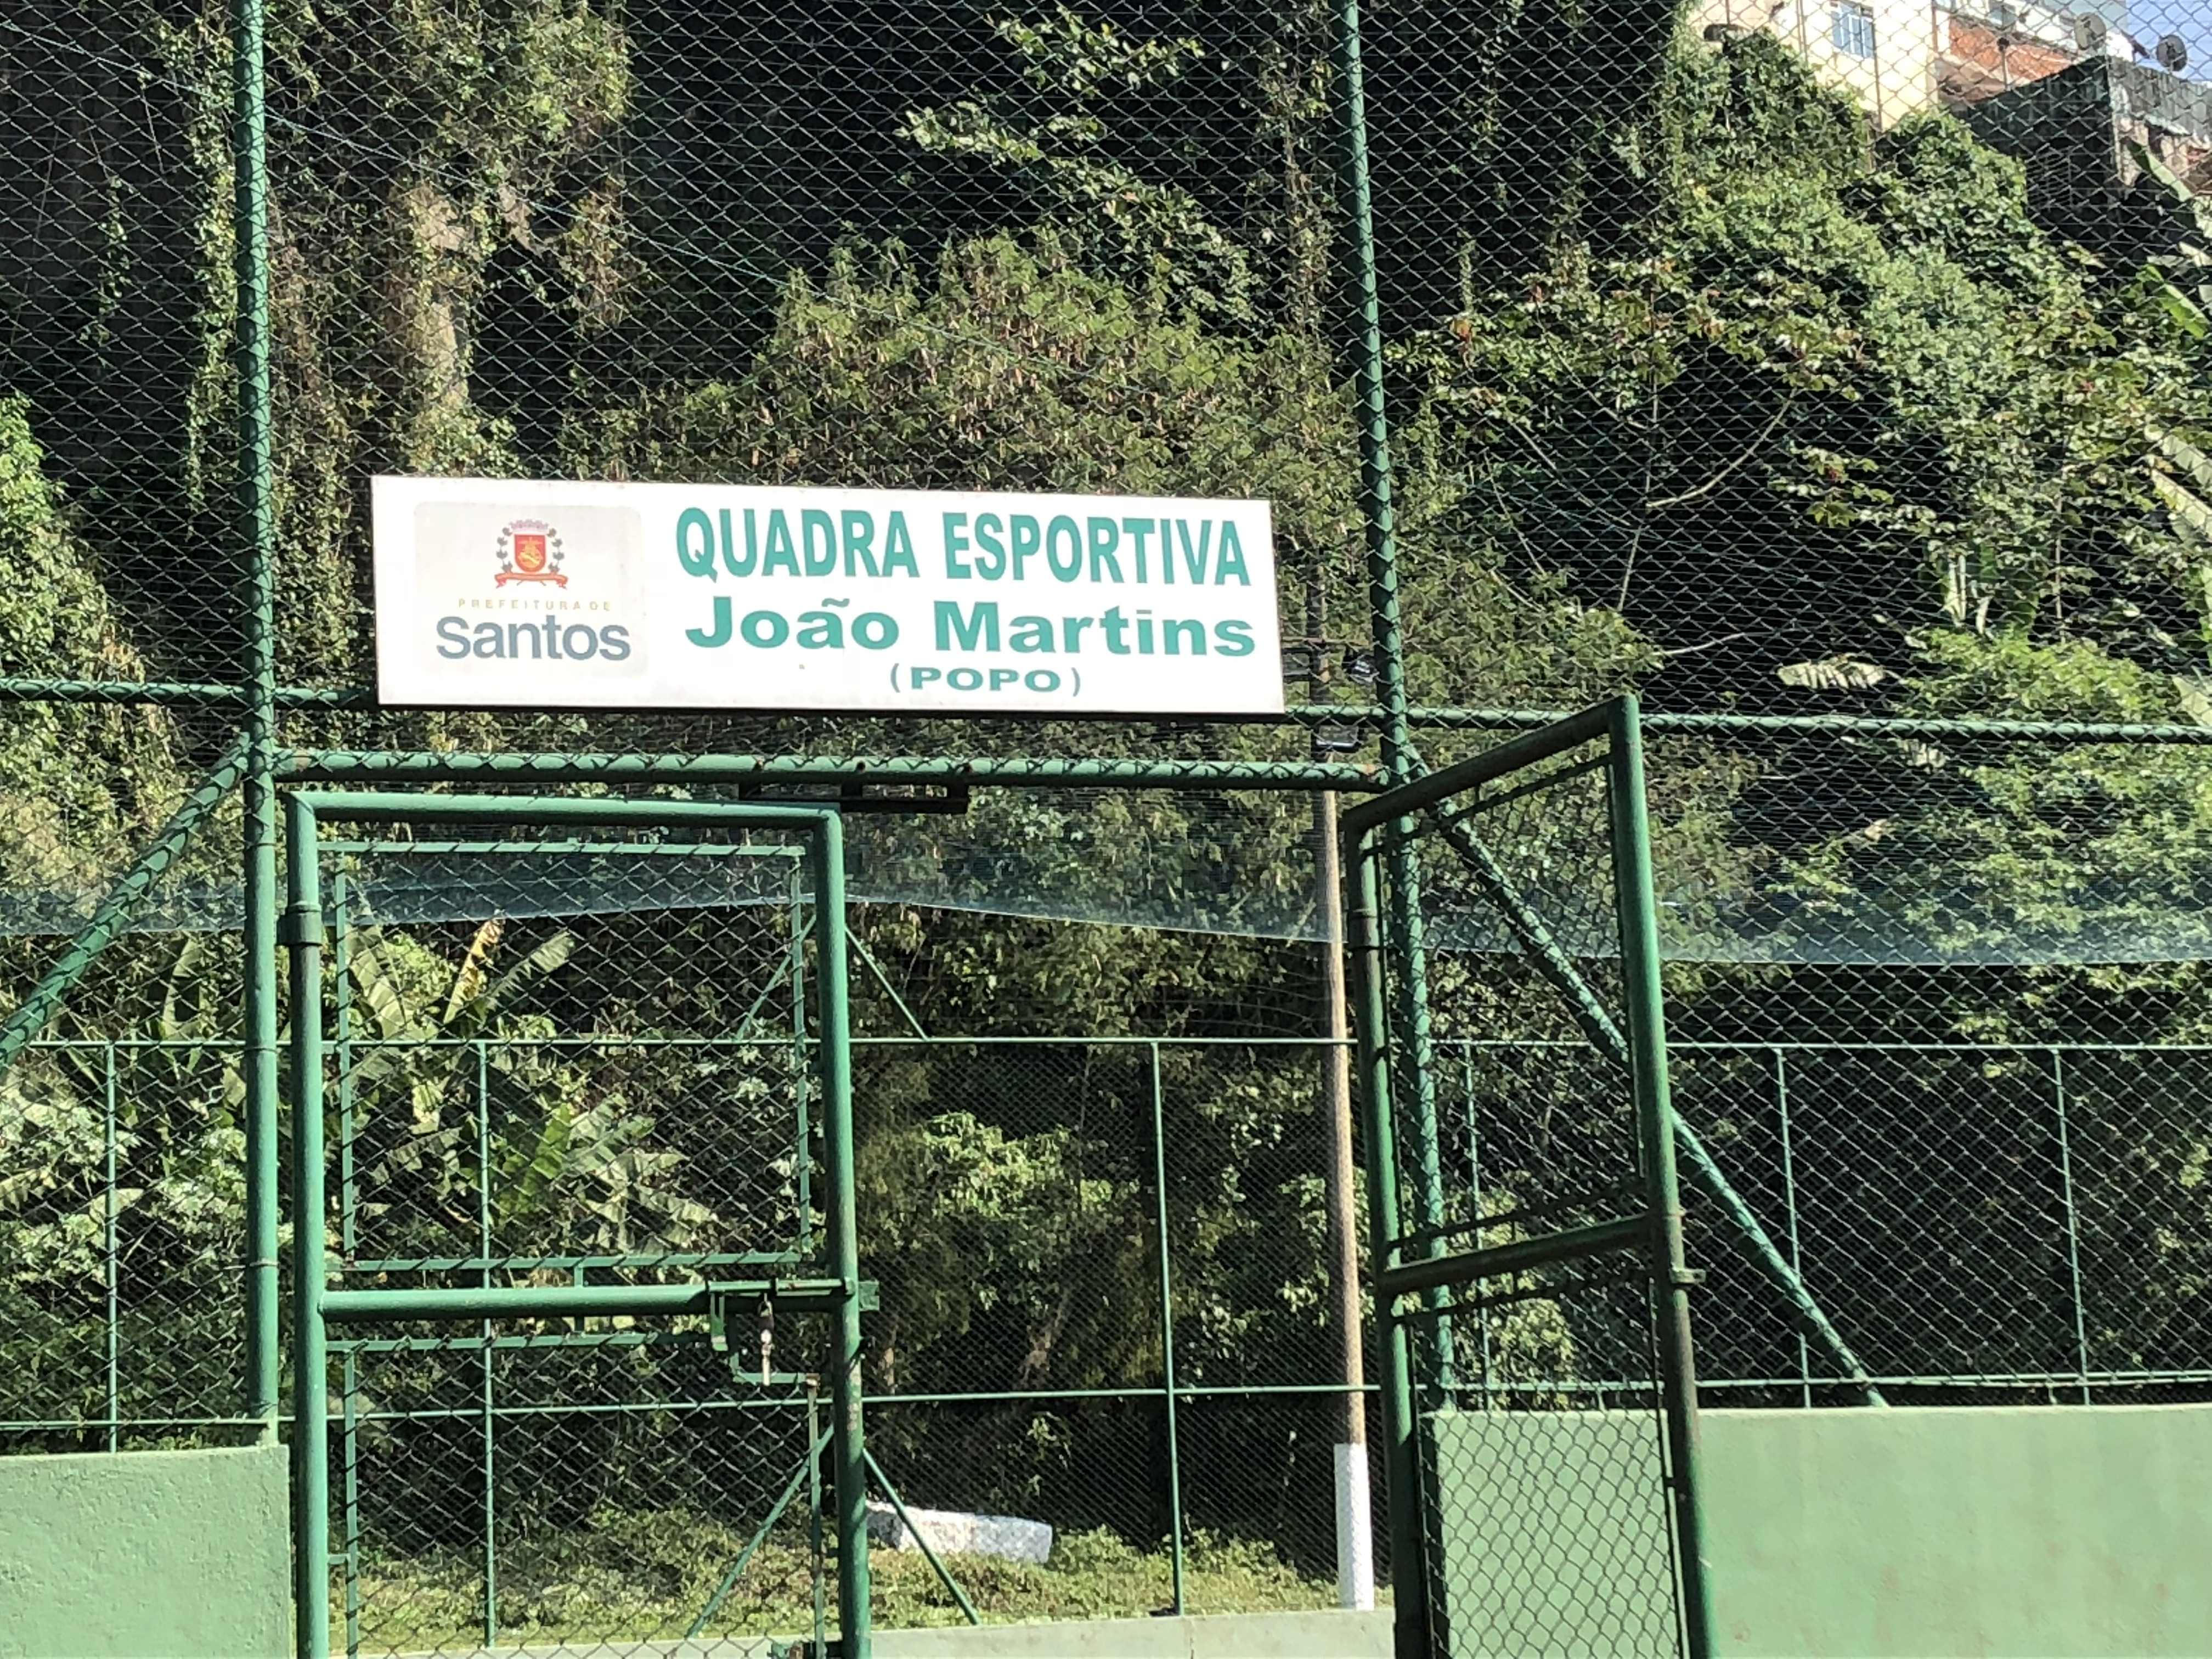 FSD-Brazil is interested in working with local government to refurbish the Soccer Sport Center which is currently abandoned and once served  over 1,000 children in the local community.